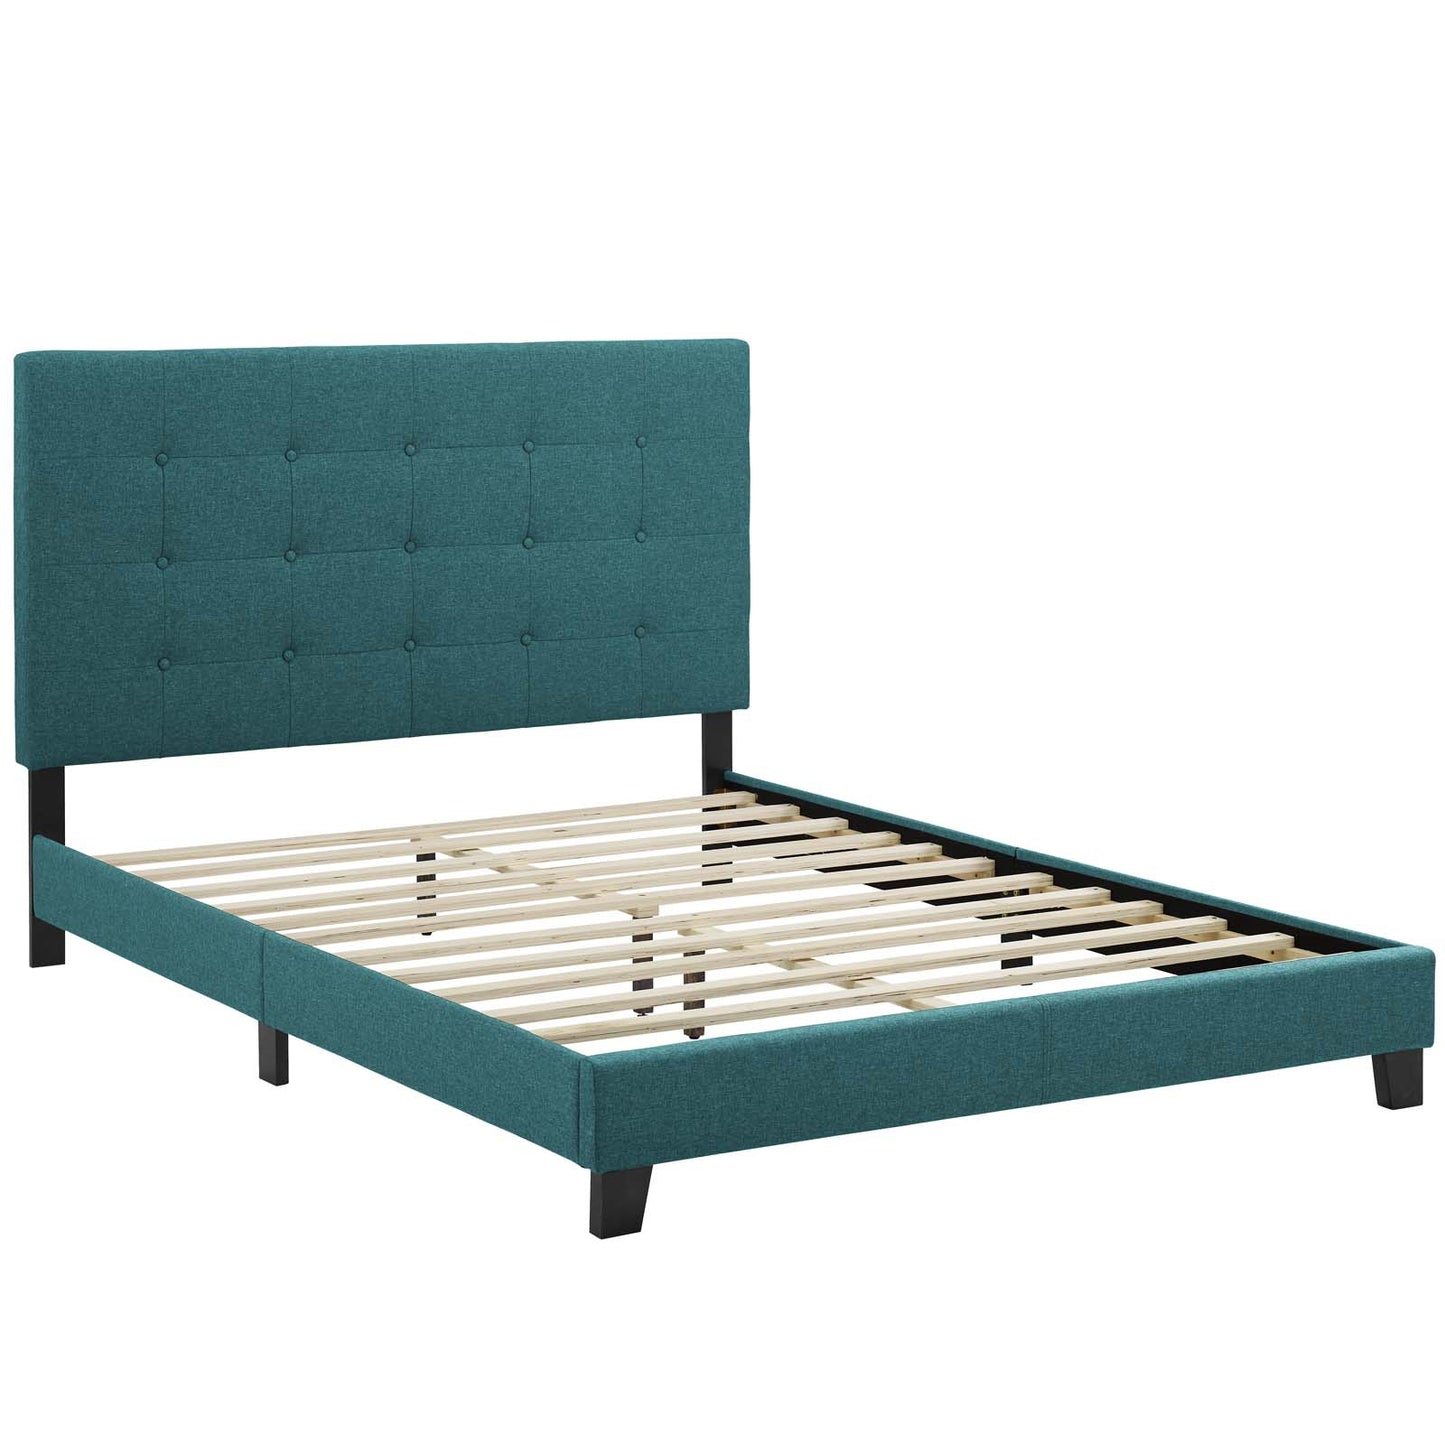 Melanie Twin Tufted Button Upholstered Fabric Platform Bed Teal MOD-5877-TEA